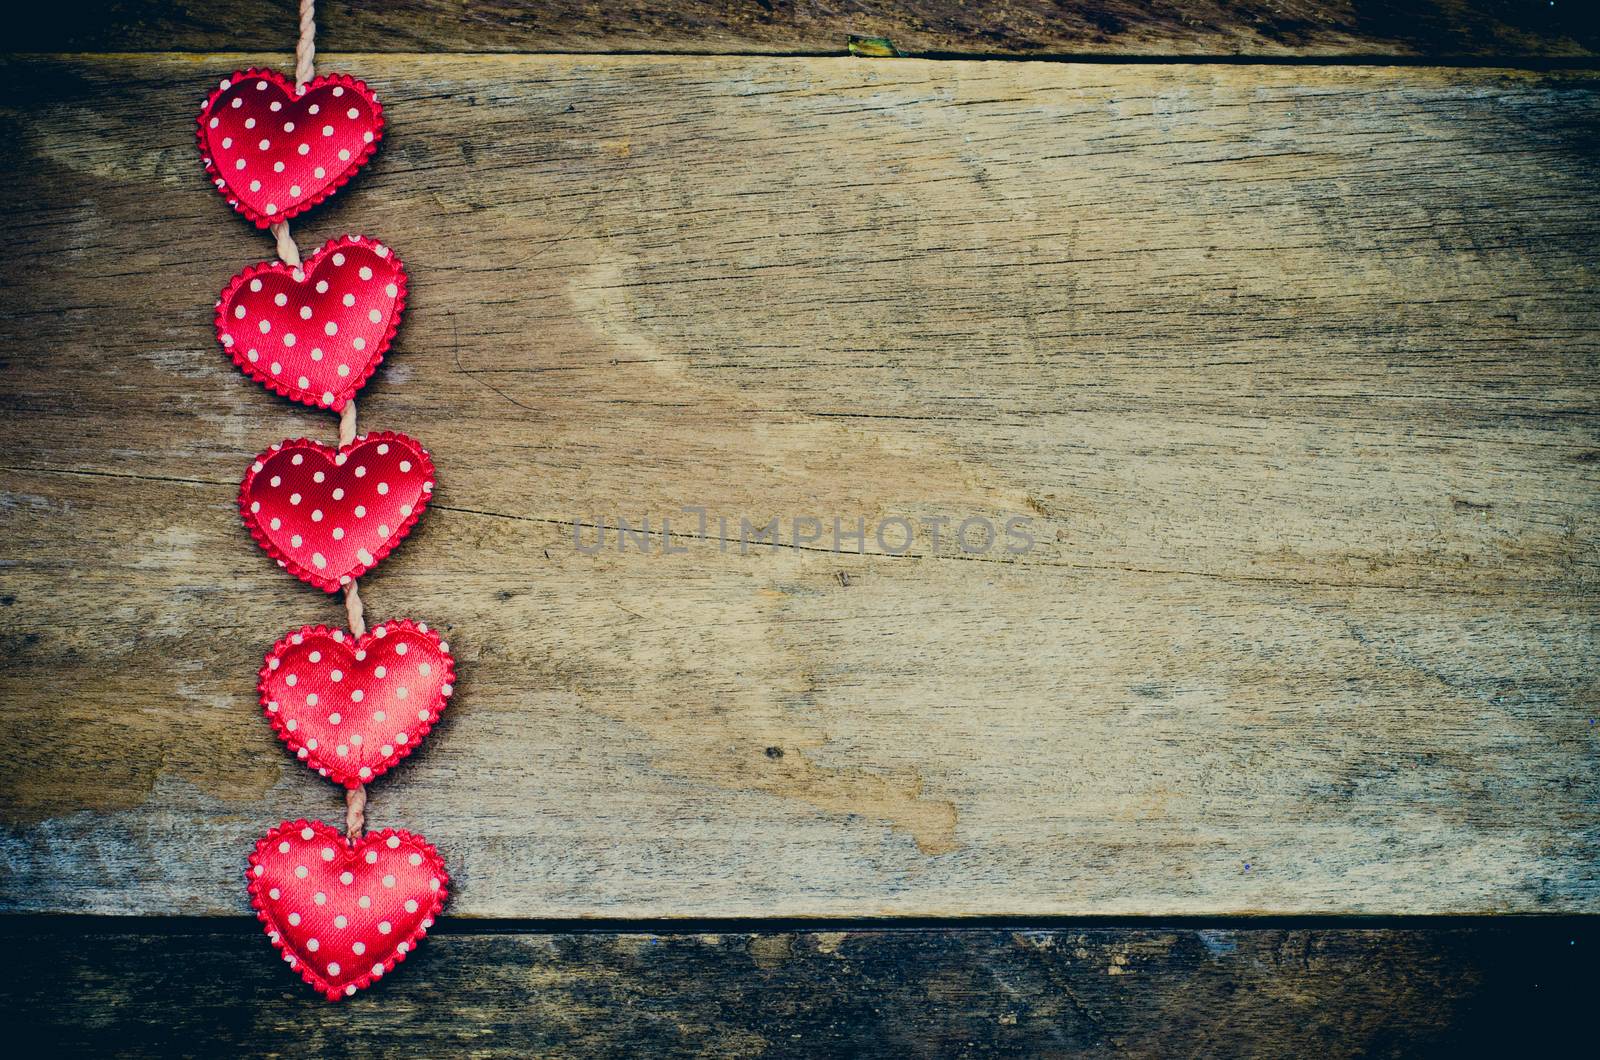 Love hearts on wooden background